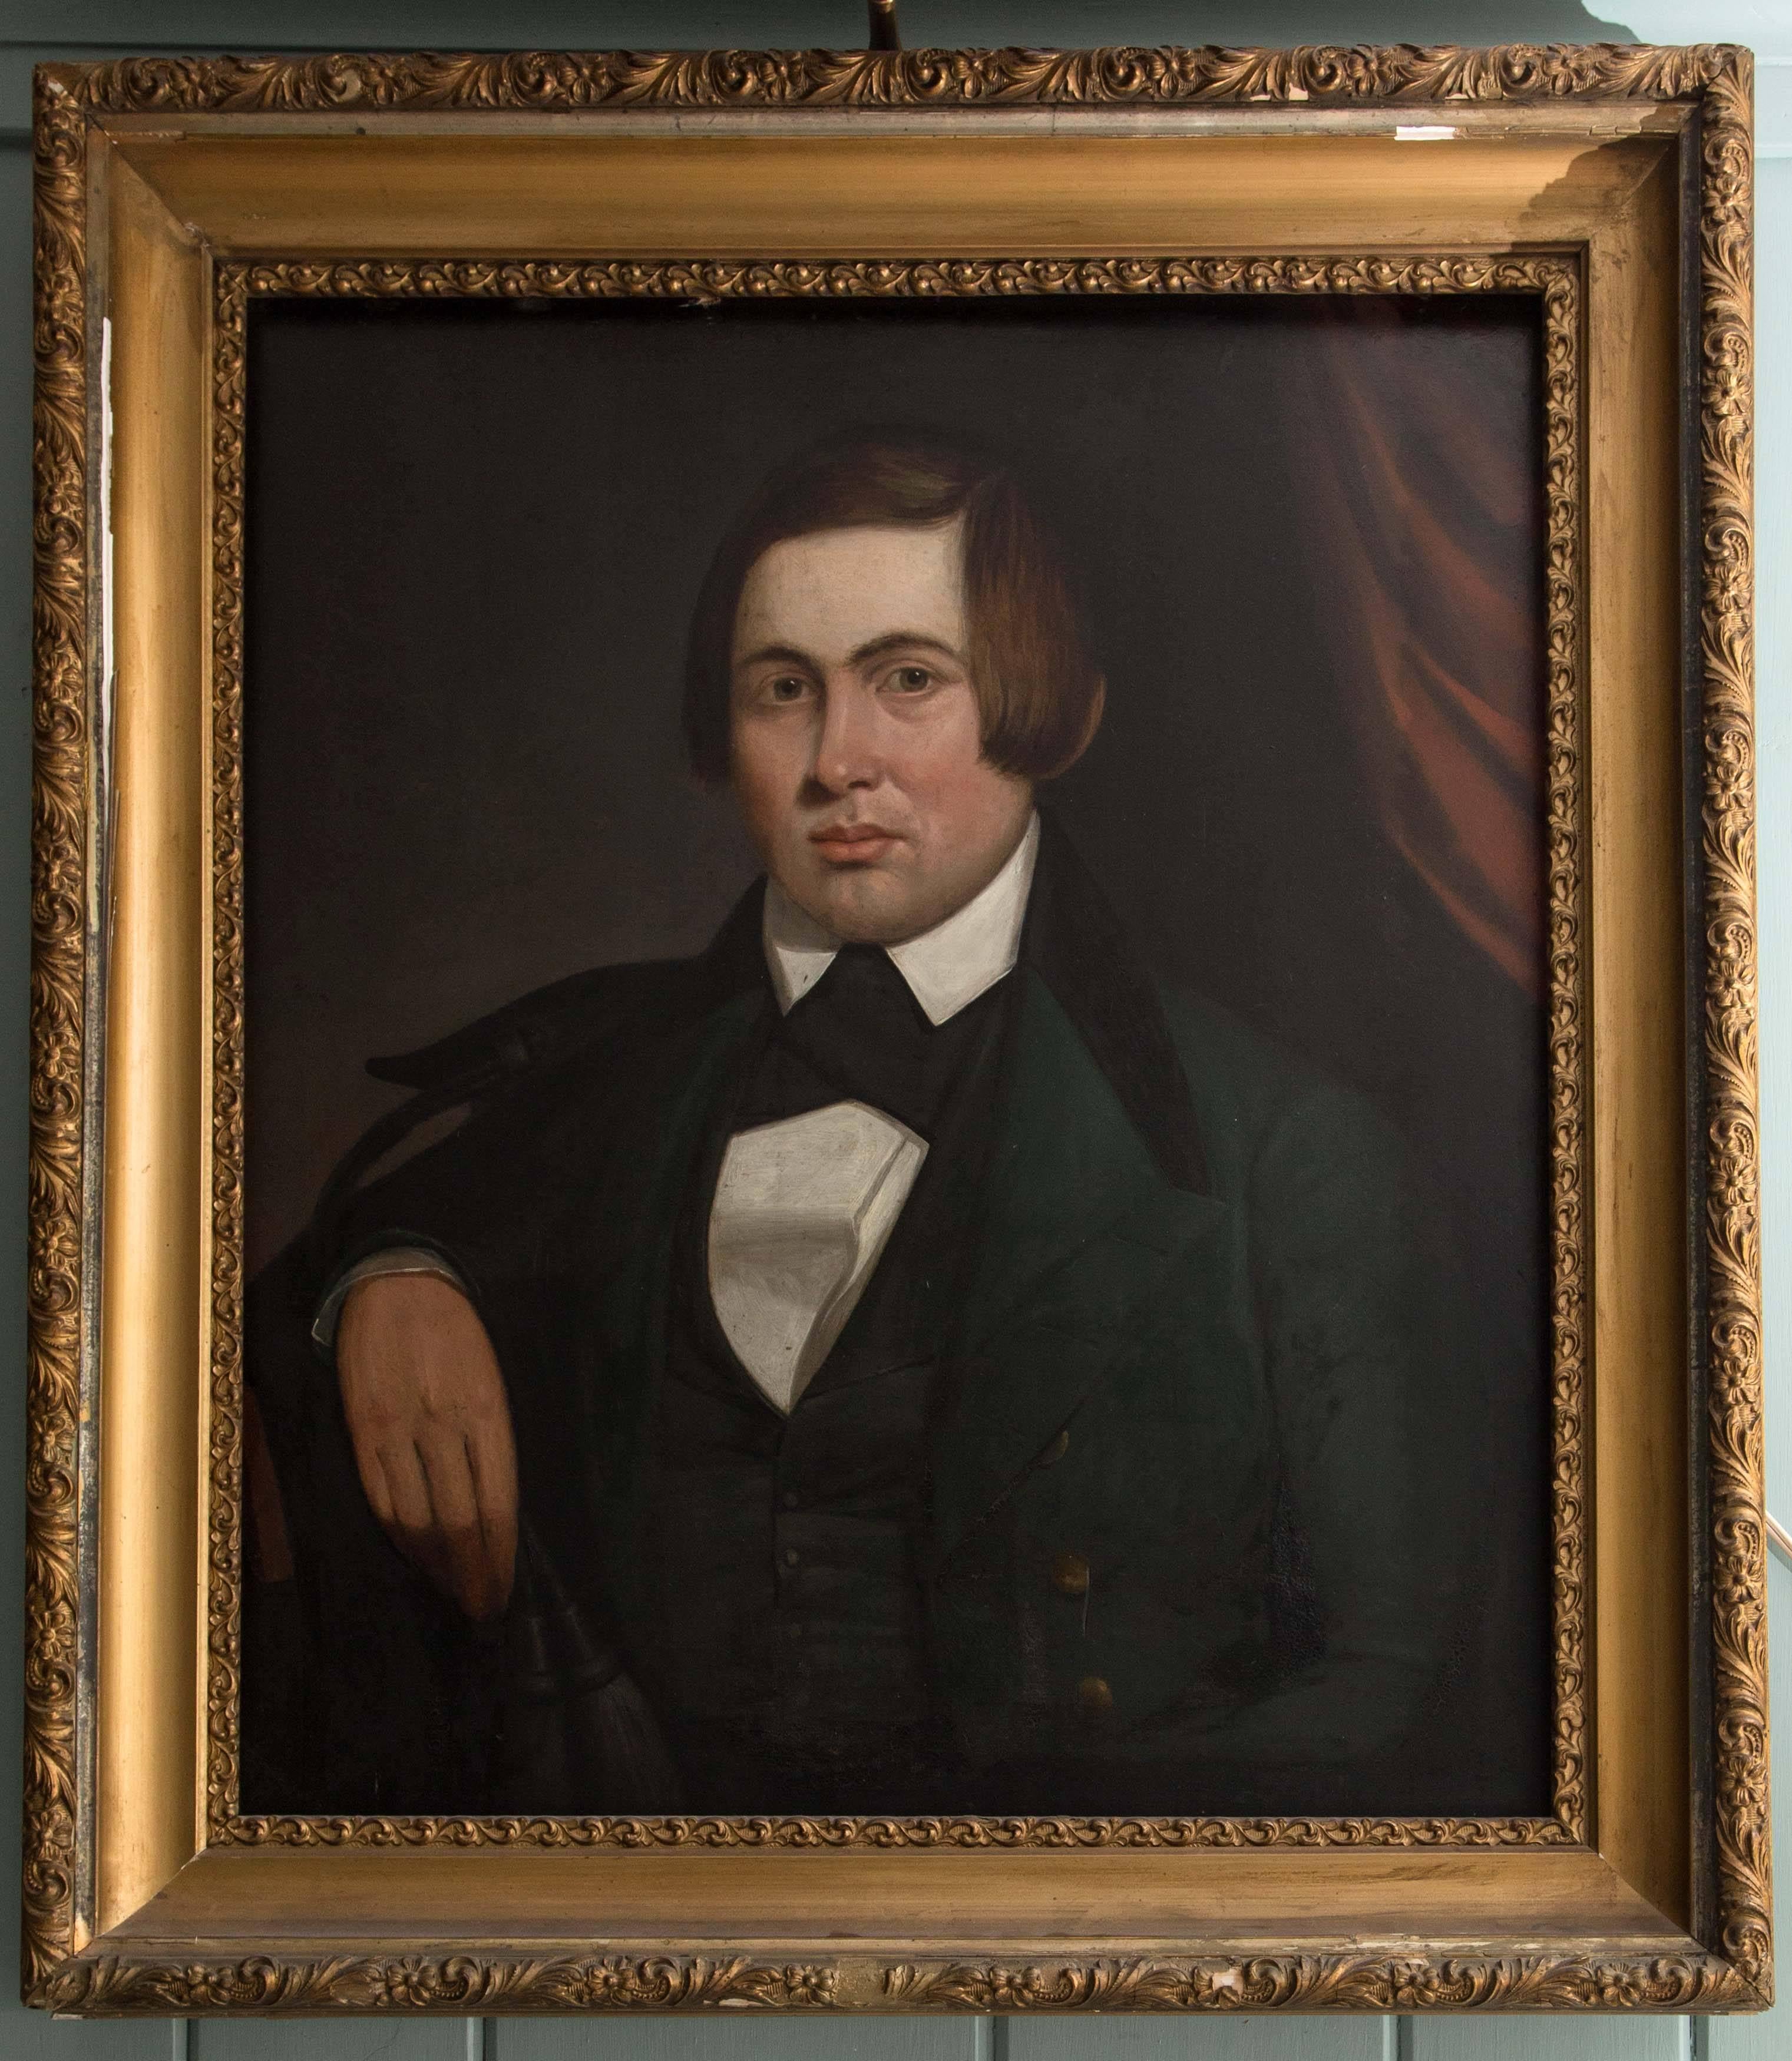 Portrait of a gentleman by Lyman Emerson Cole, American portrait painter (1812 – 1878).
Inscribed verso, Painted by Lyman E. Cole, Troy NY 1841.”
Lyman Cole was born on May 28, 1812 in Newburyport, Massachusetts. His father was Moses Dupre Cole, a